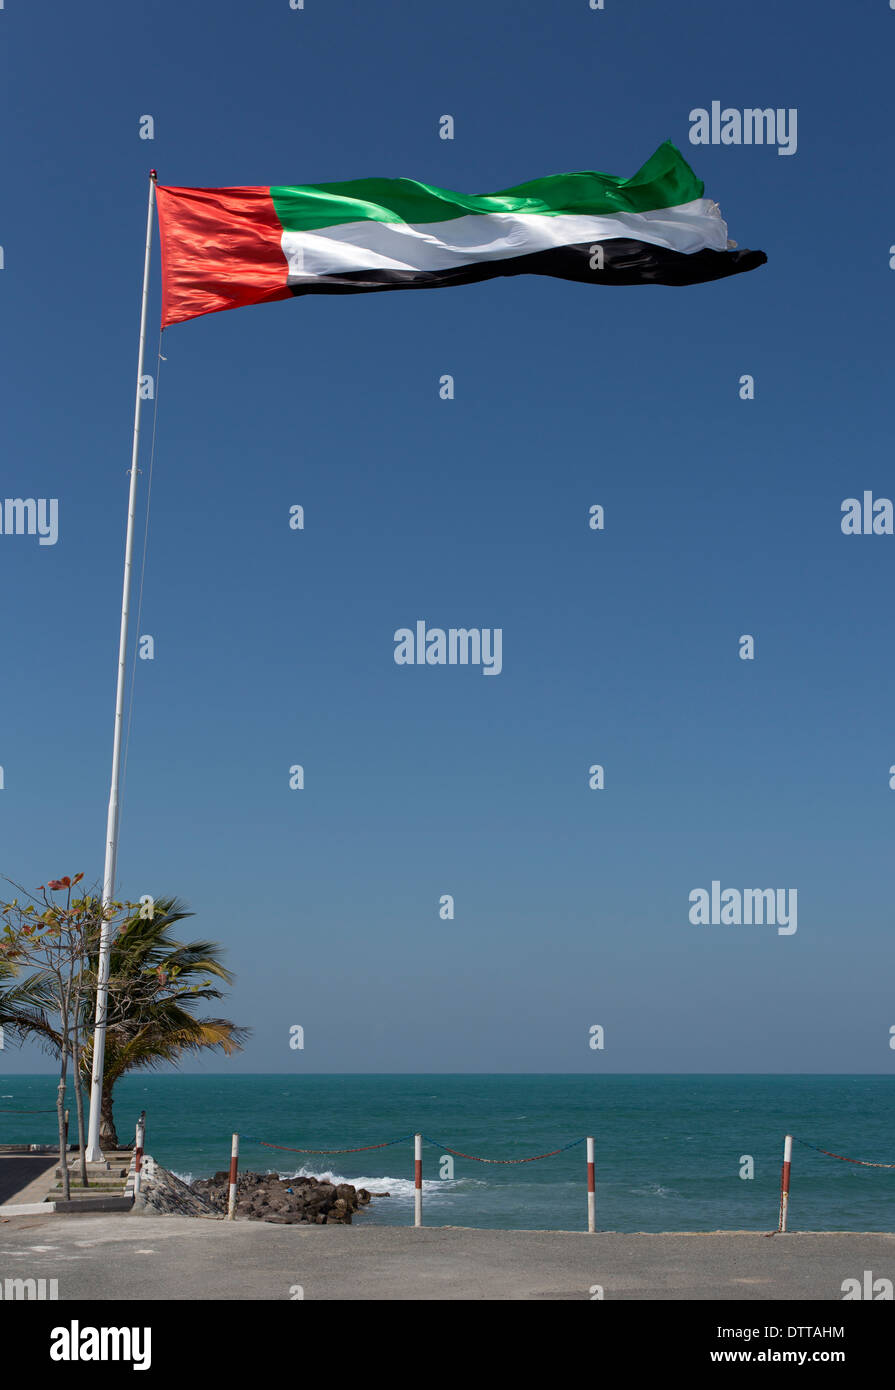 A UAE flag blowing in the window with the Arabian Gulf in the background.This was taken in Ras Al Khaimah in the UAE Stock Photo